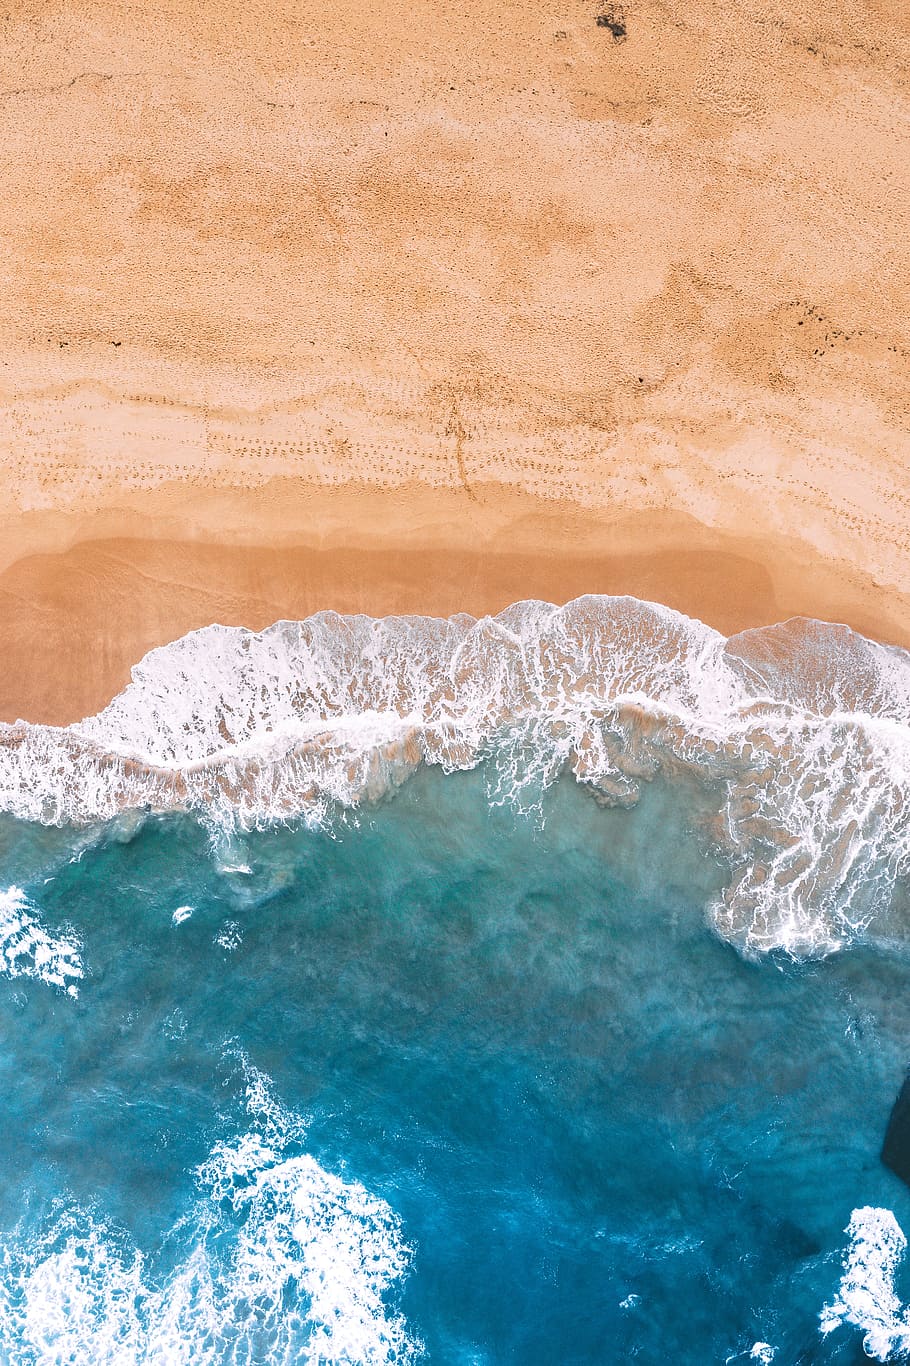 Free Download Hd Wallpaper Sea Waves On Brown Sand Drone View